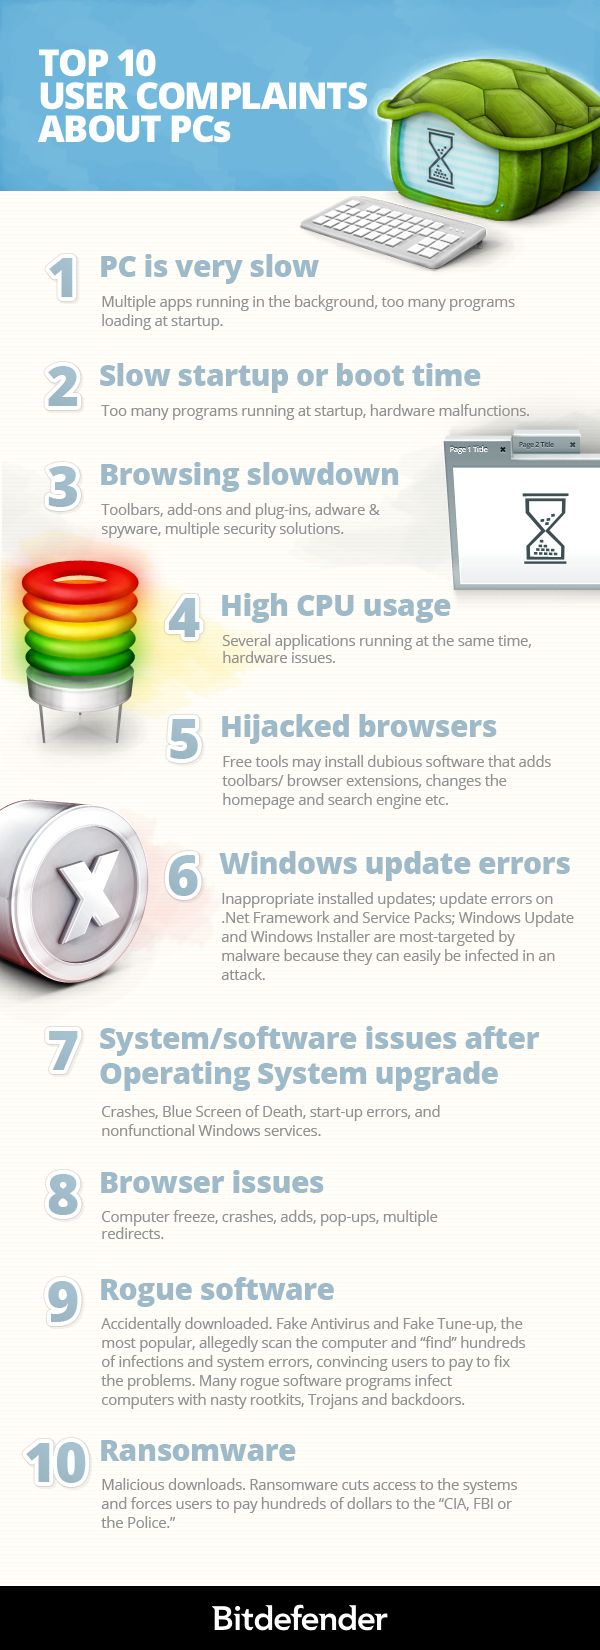 Top 3 PC User Peeves: System Slowdown, Sluggish Startup and Browser Lag